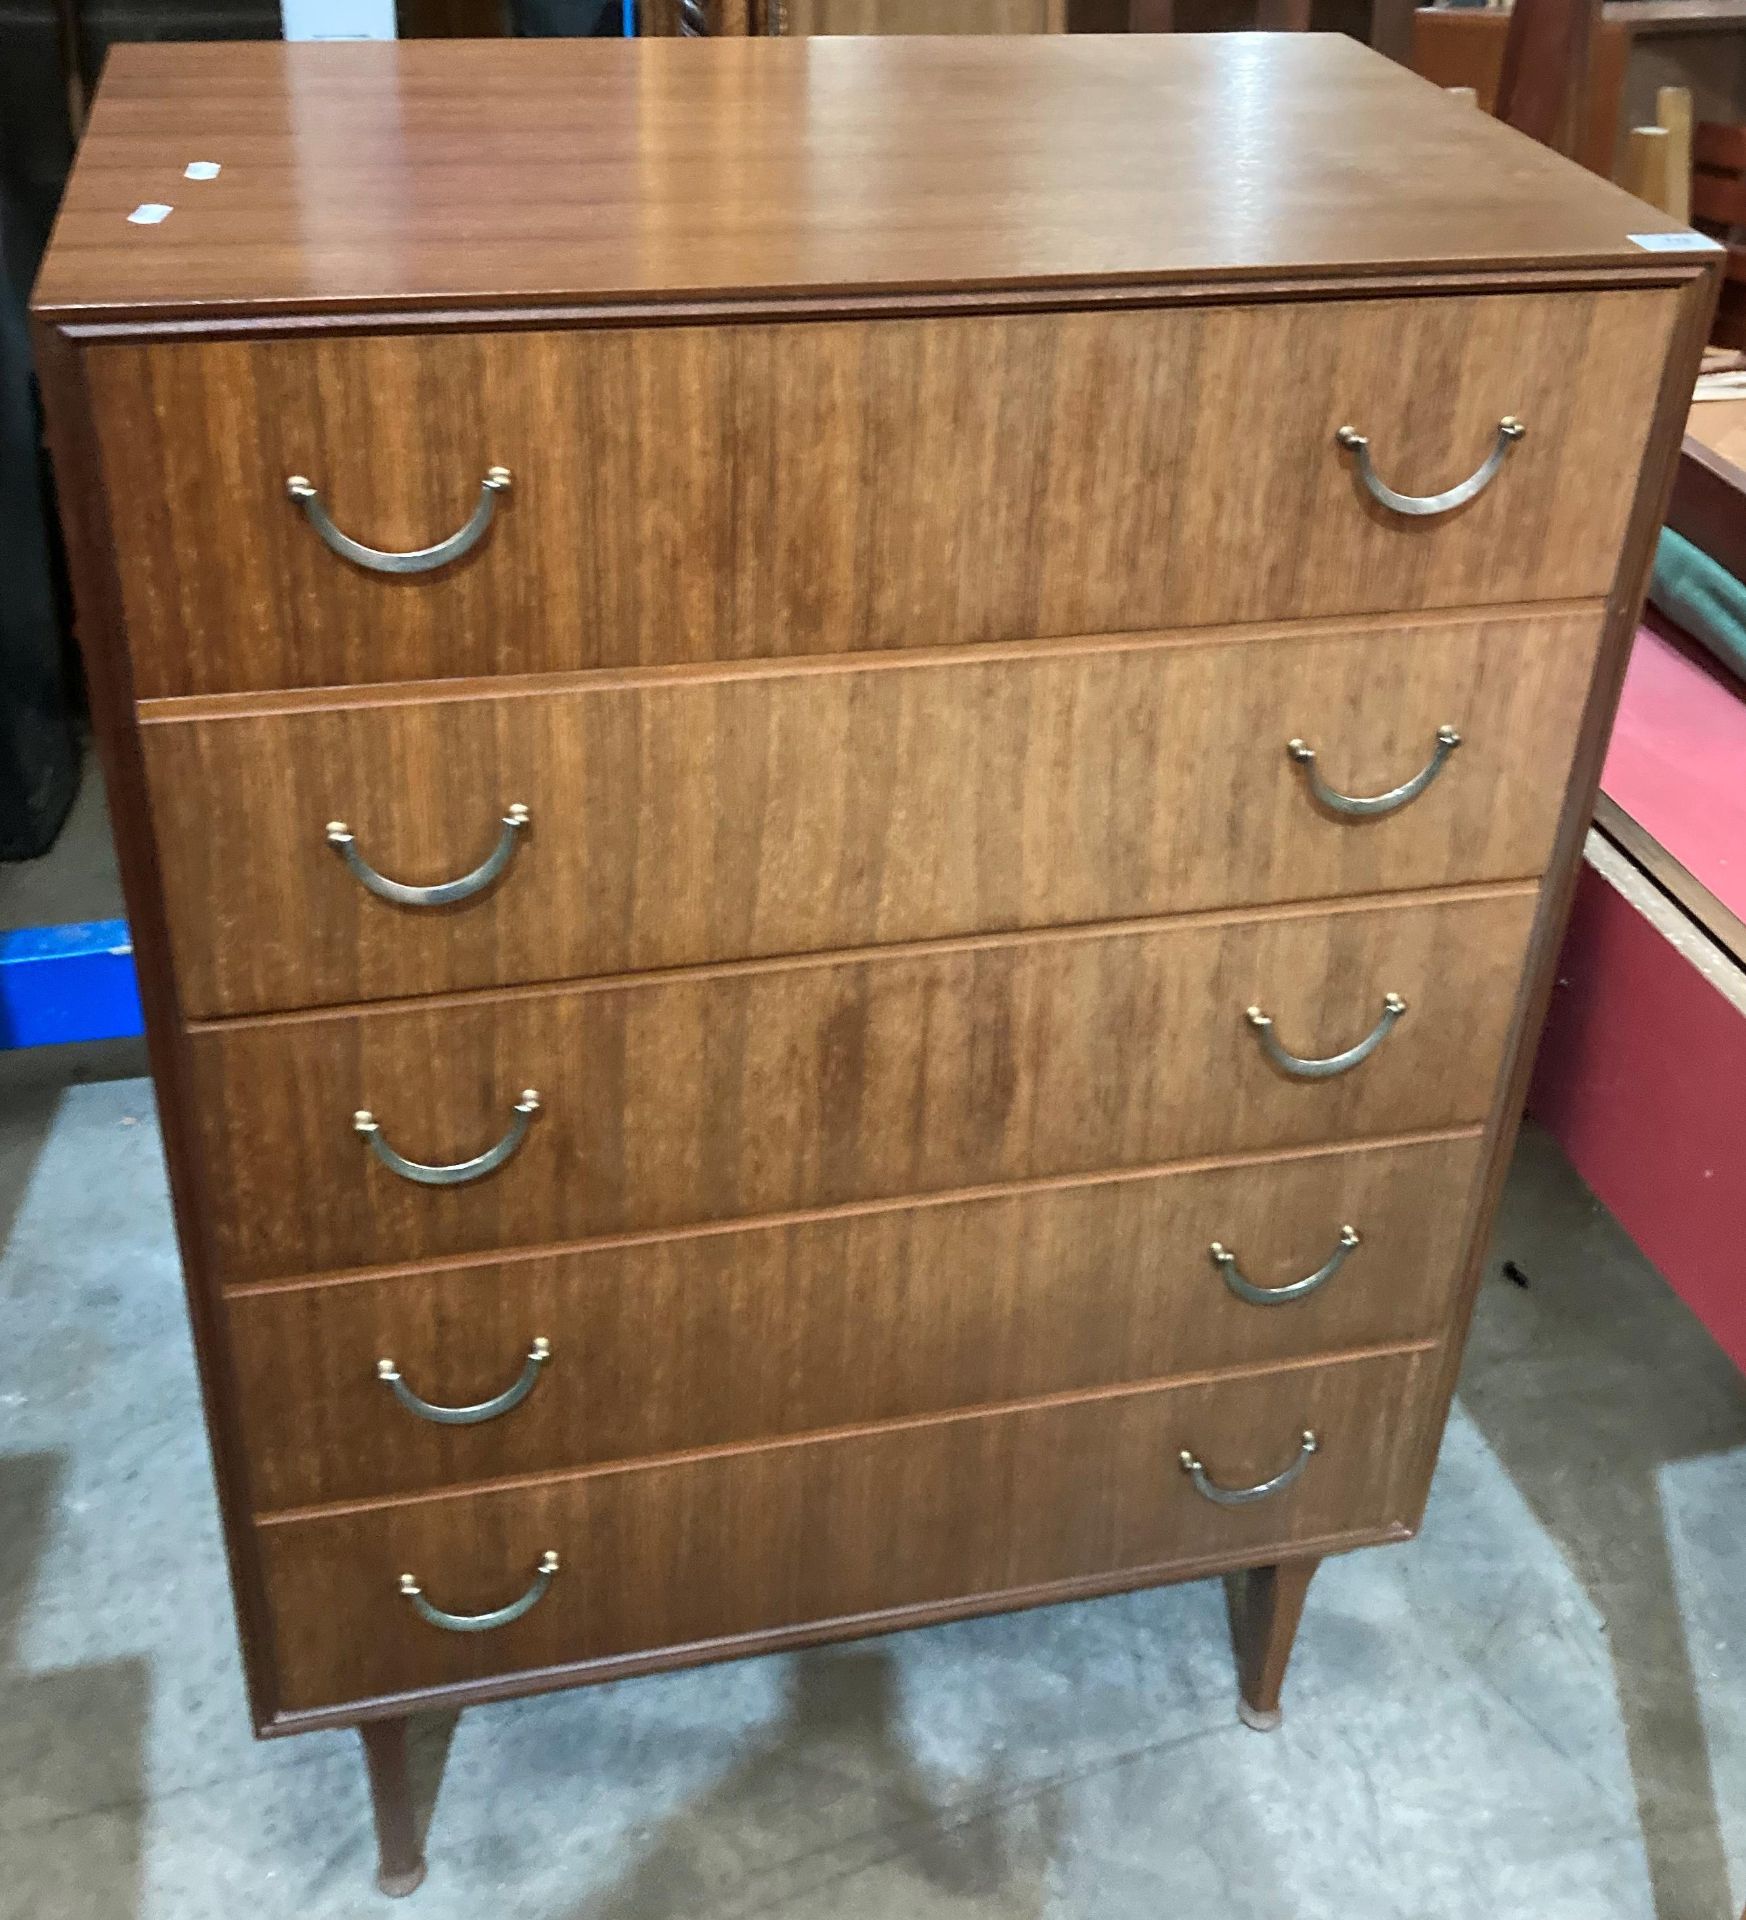 A Meredew five drawer chest of drawers in teak finish - 77 x 46 x 110cm high (saleroom location: